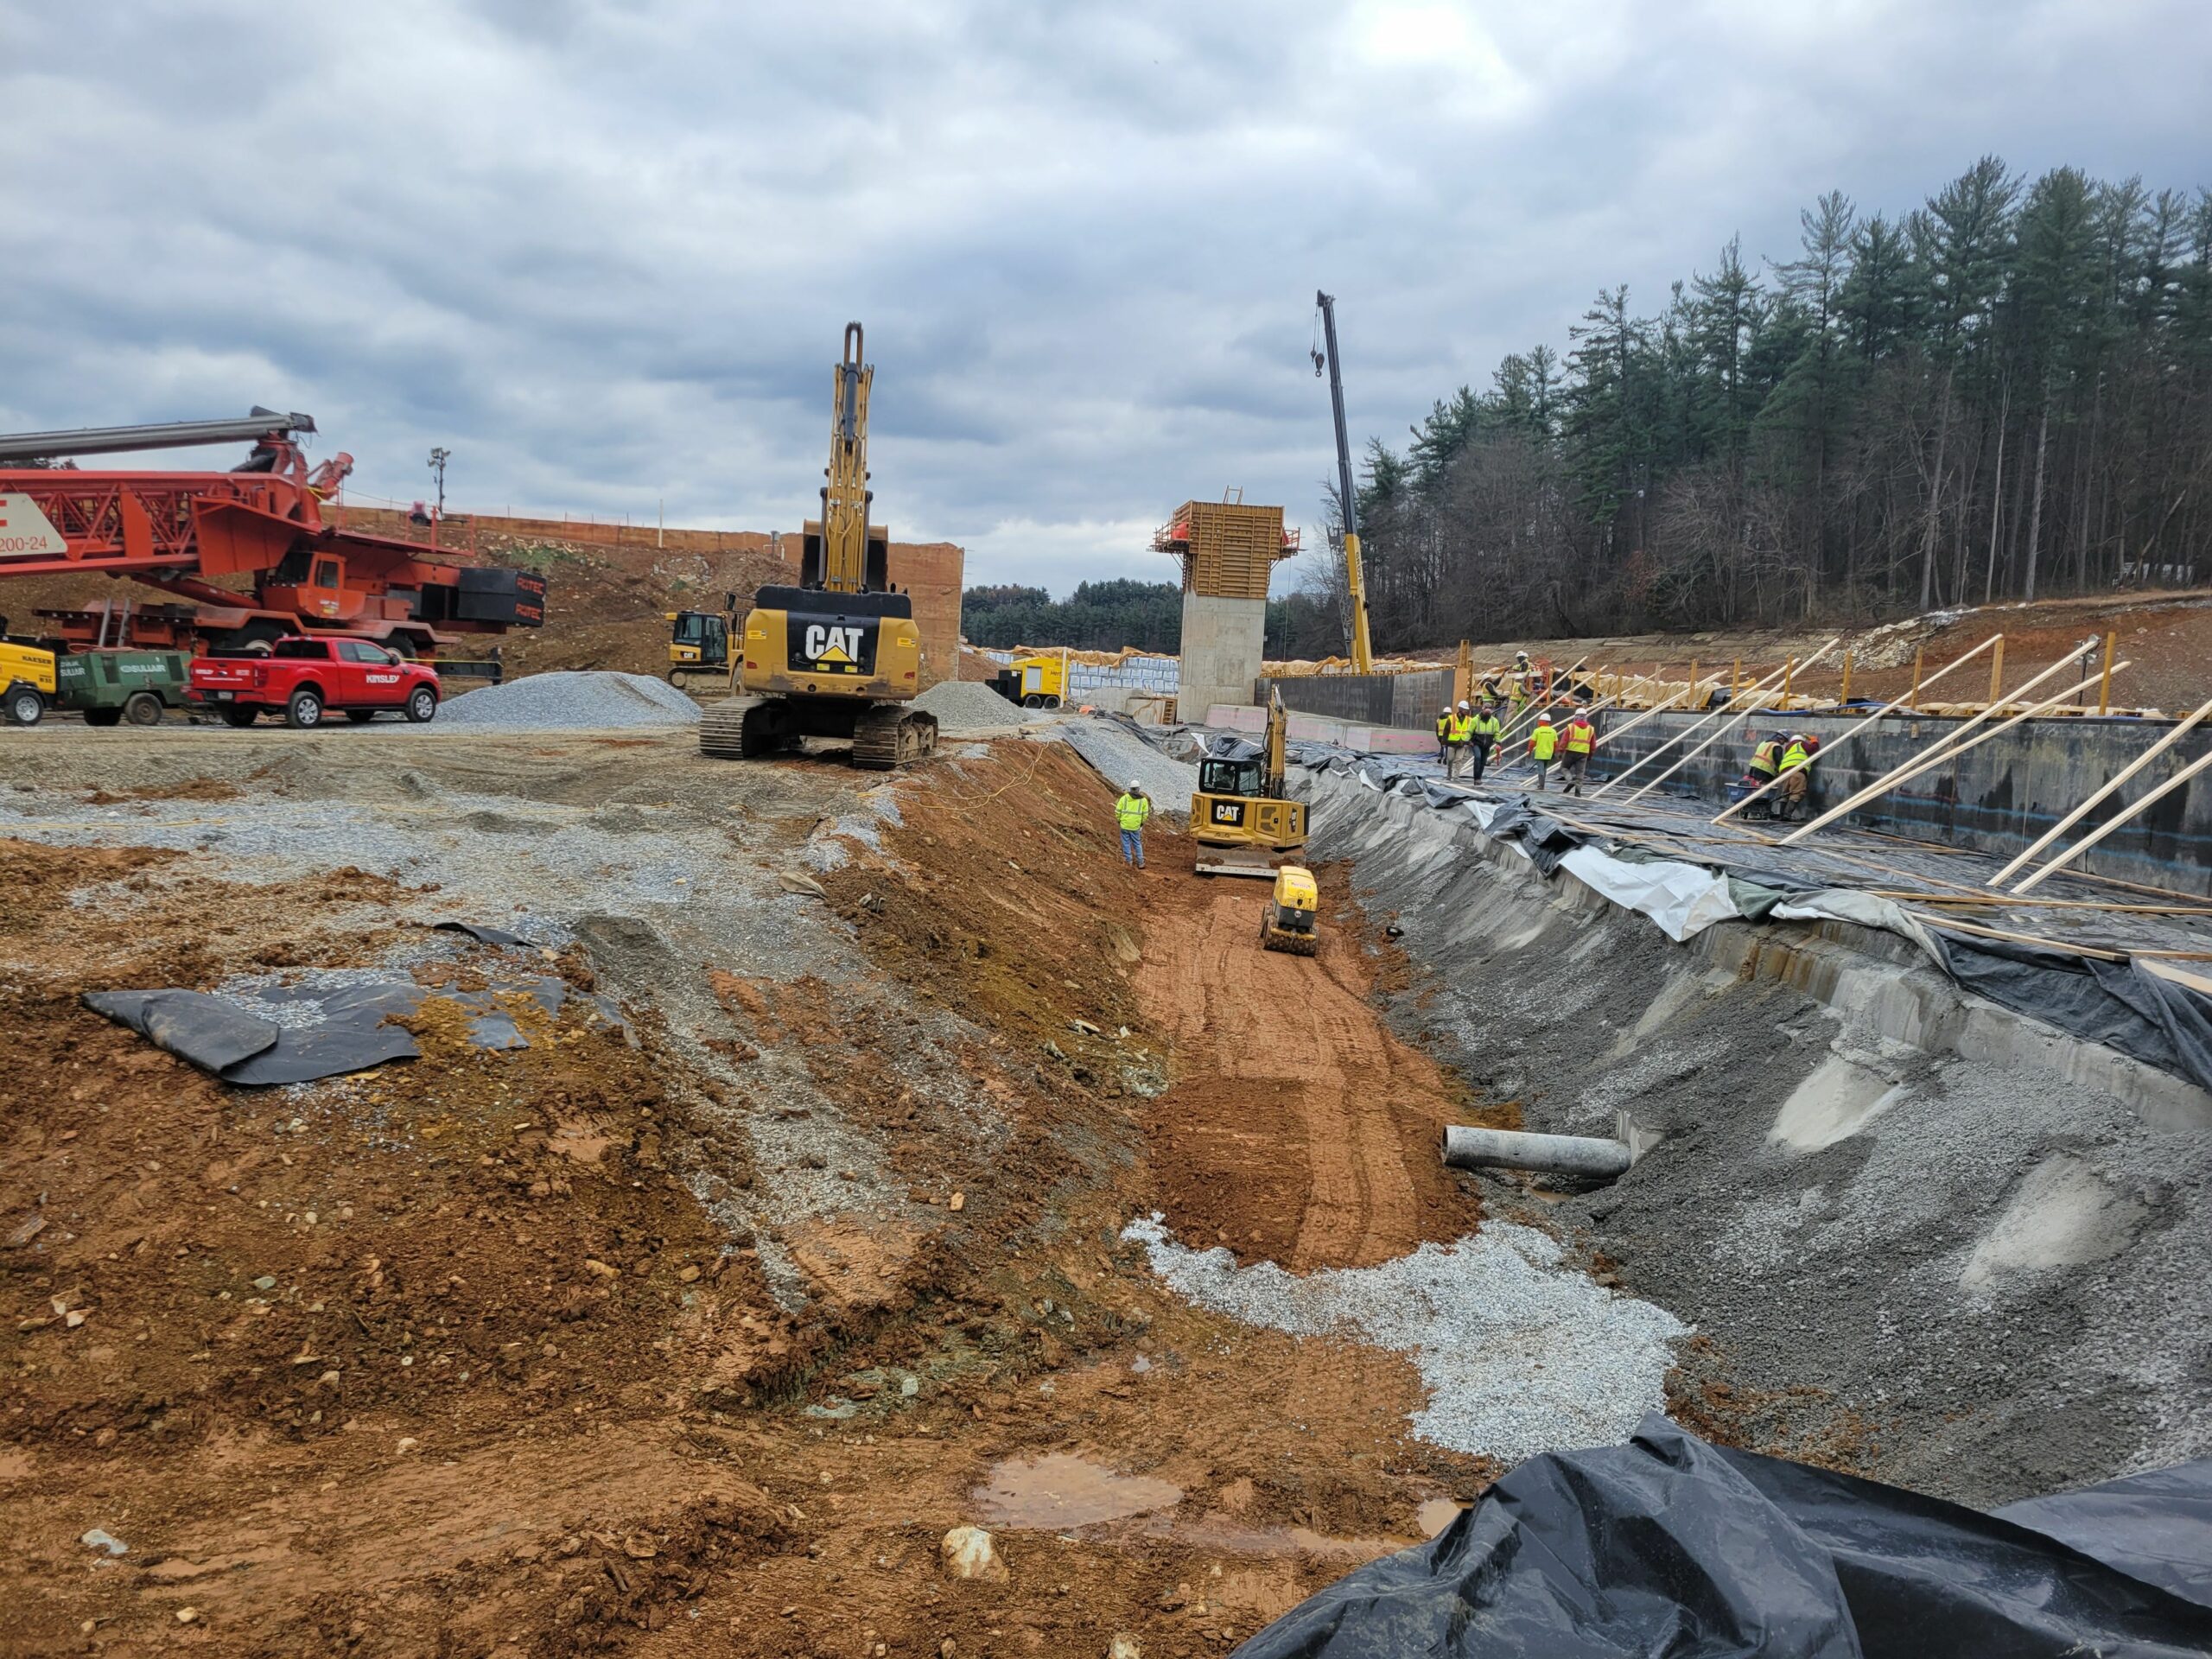 Construction work at the Lake Williams Dam site.